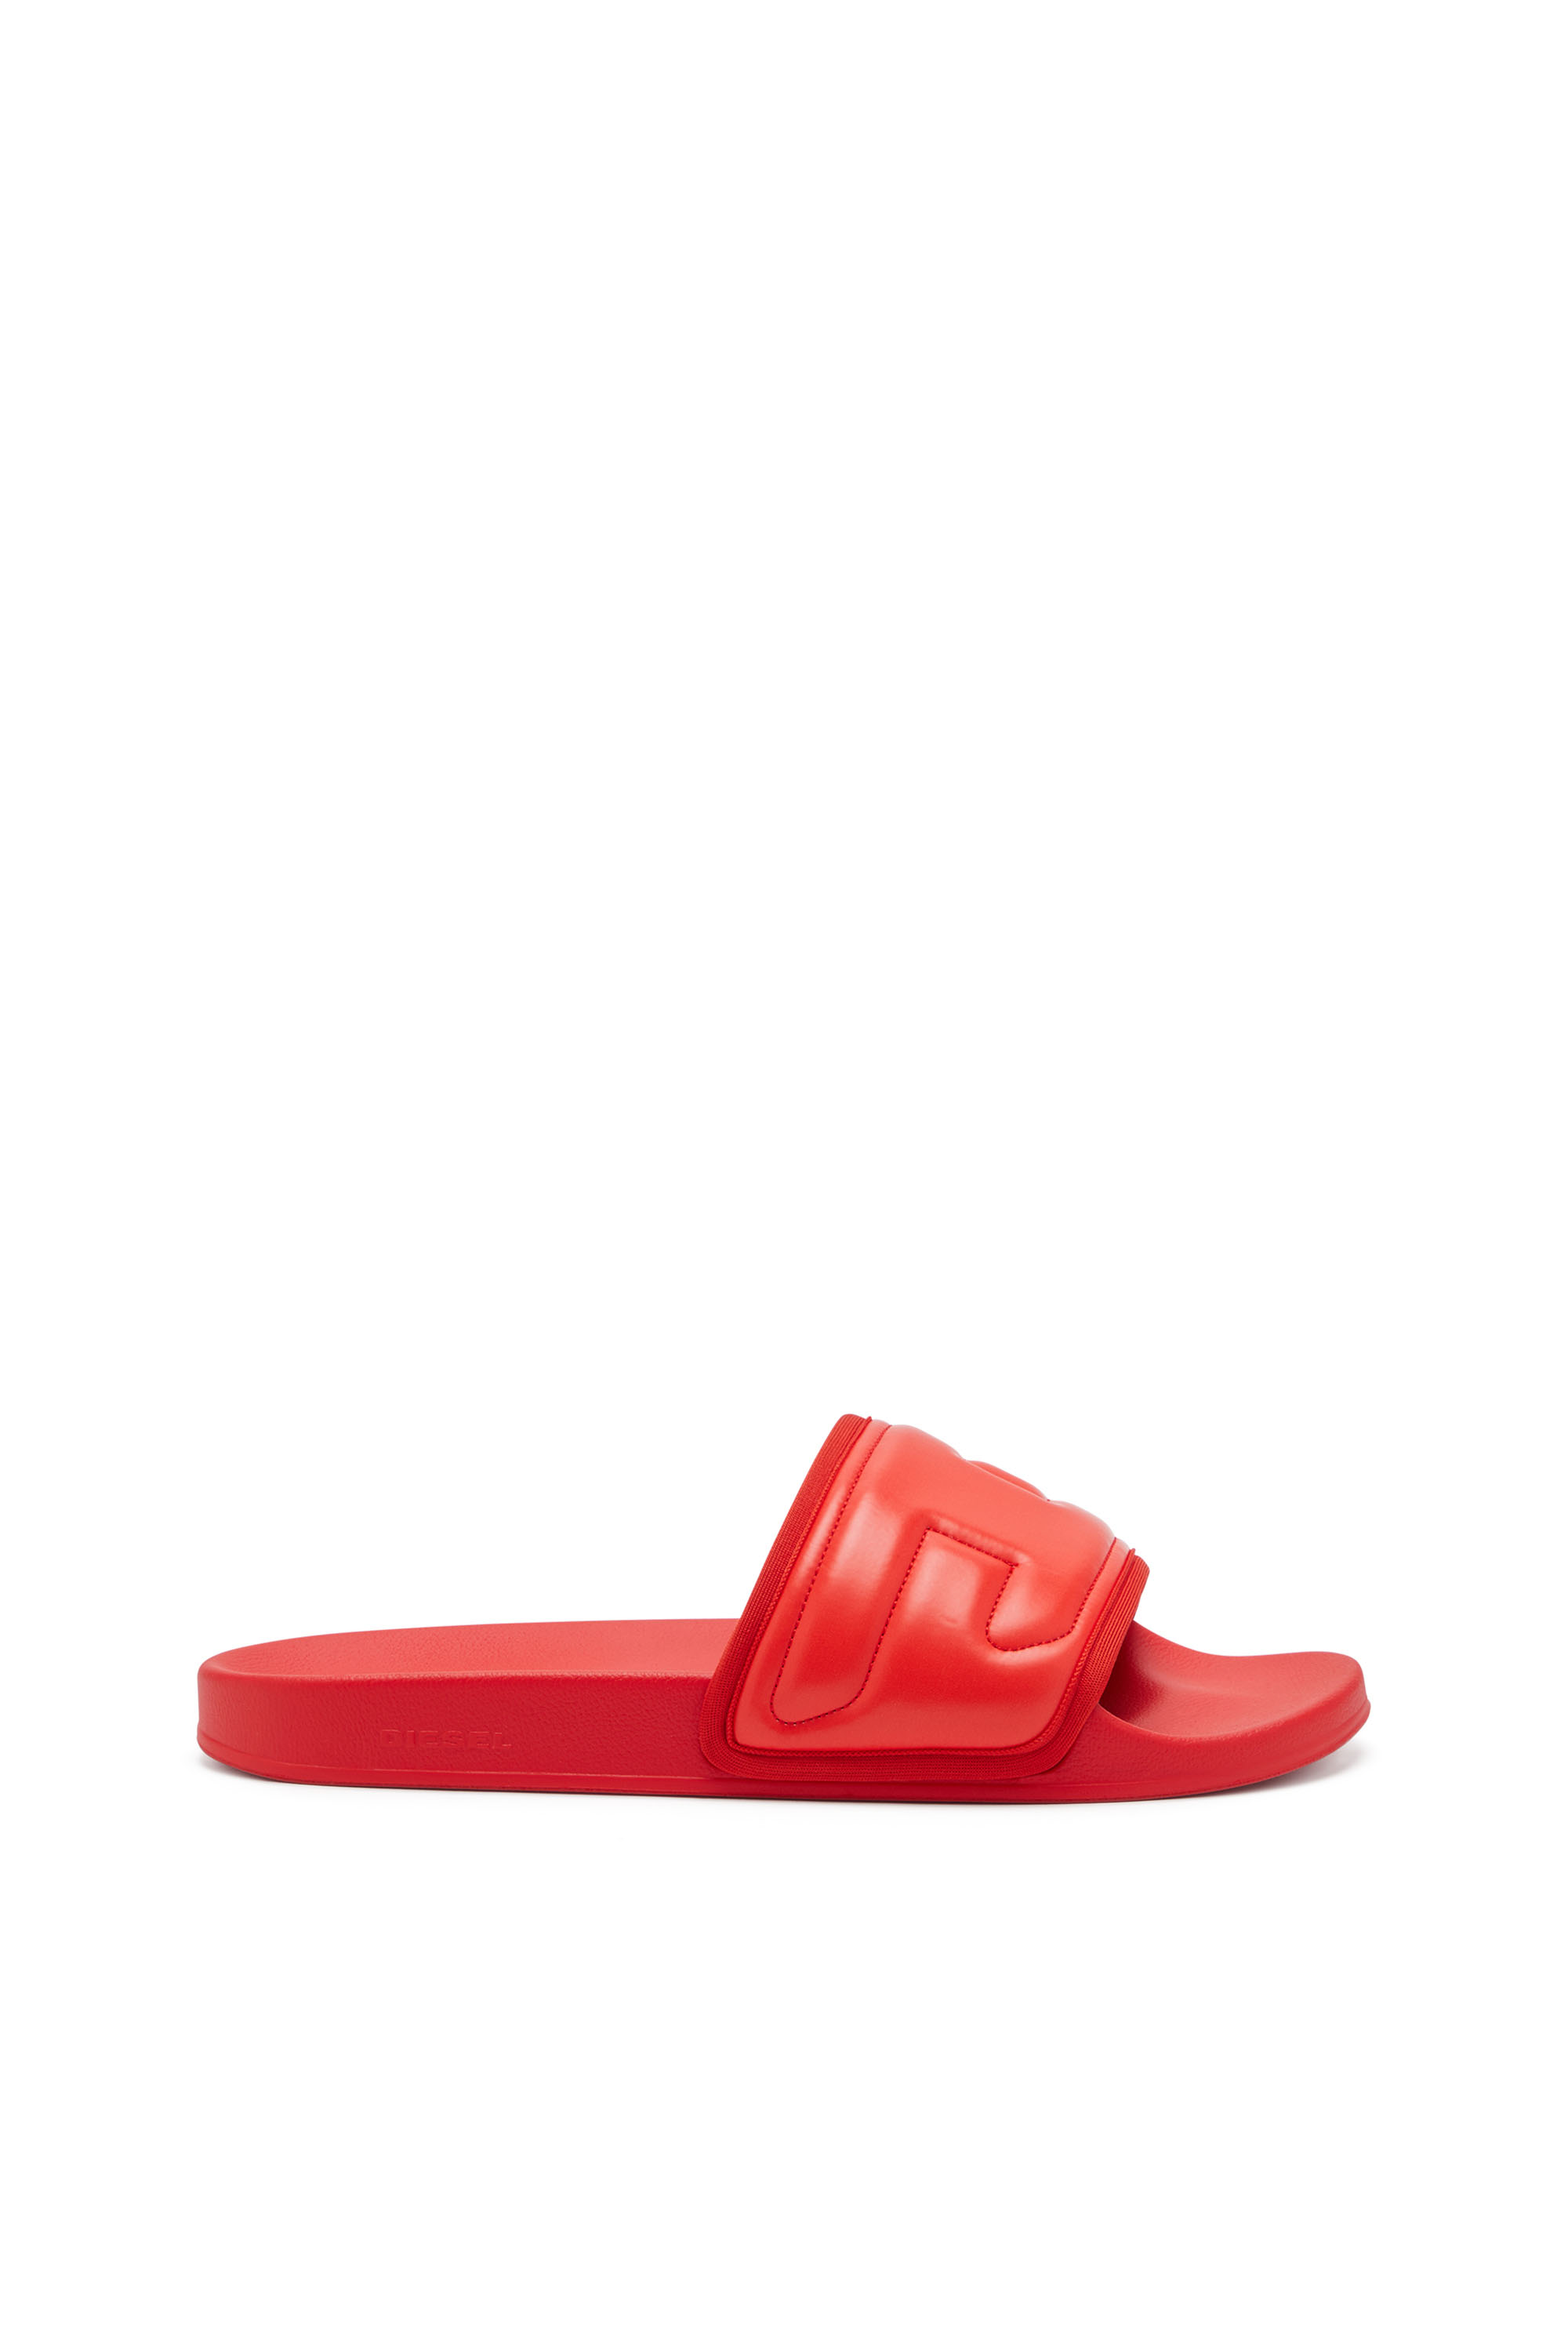 Diesel - SA-MAYEMI PUF X, Unisex Sa-Mayemi Puf X - Pool slides with puffy D logo in Red - Image 1